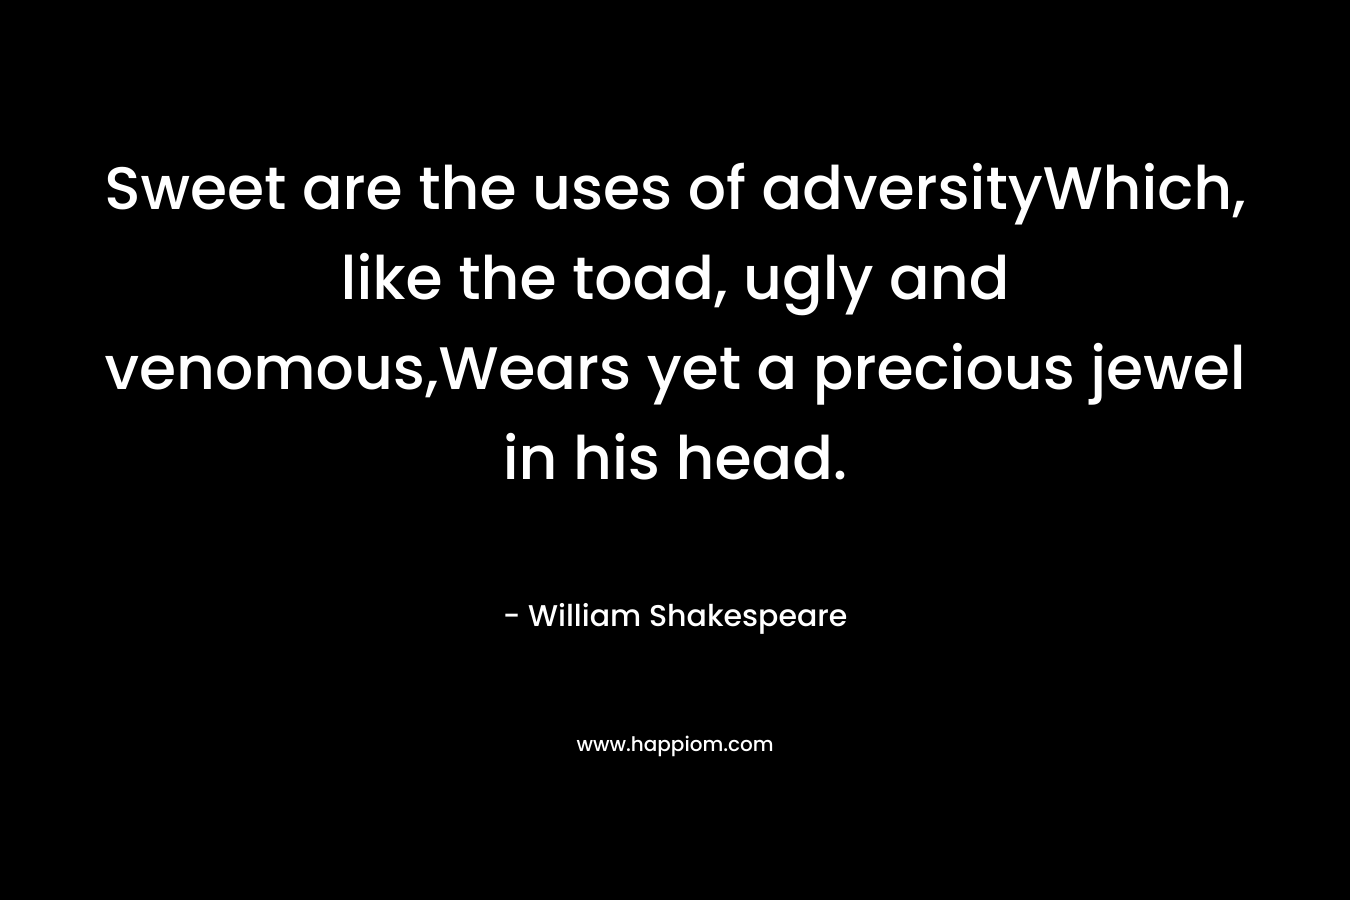 Sweet are the uses of adversityWhich, like the toad, ugly and venomous,Wears yet a precious jewel in his head.